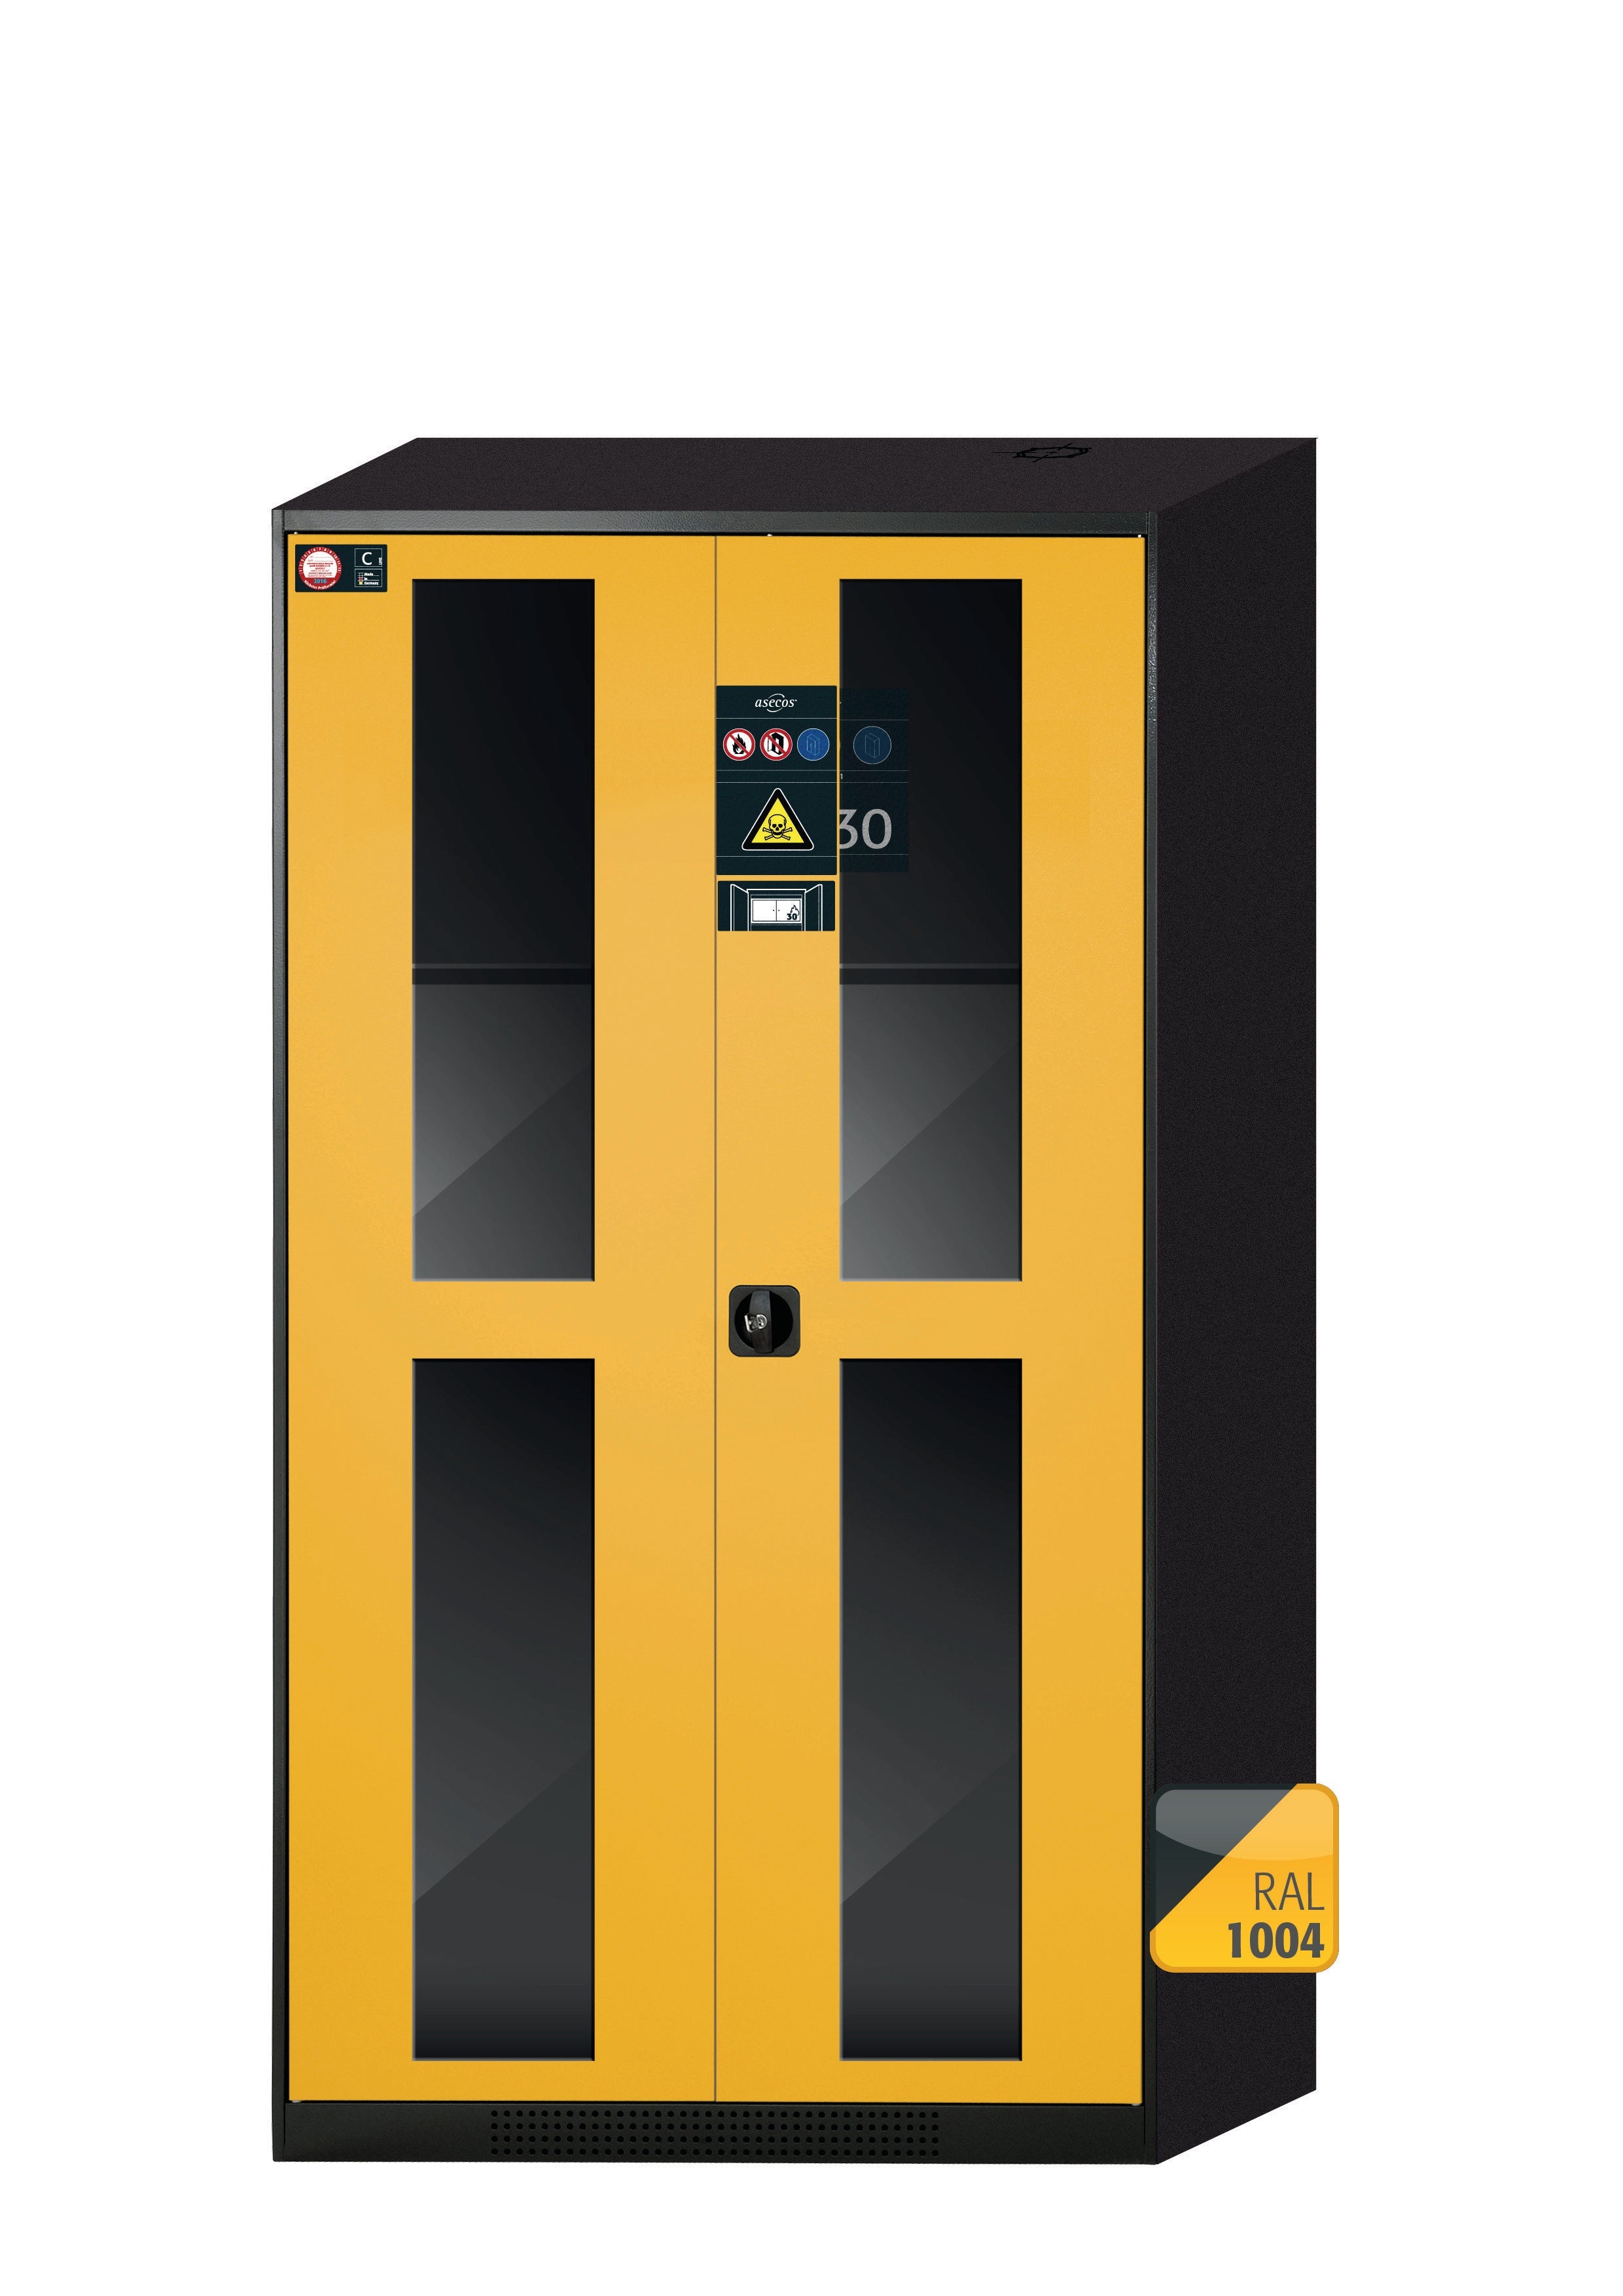 Chemical cabinet with type 30 safety box CS-CLASSIC-GF model CS.195.105.F.WDFW in safety yellow RAL 1004 with 2x standard shelves (sheet steel)